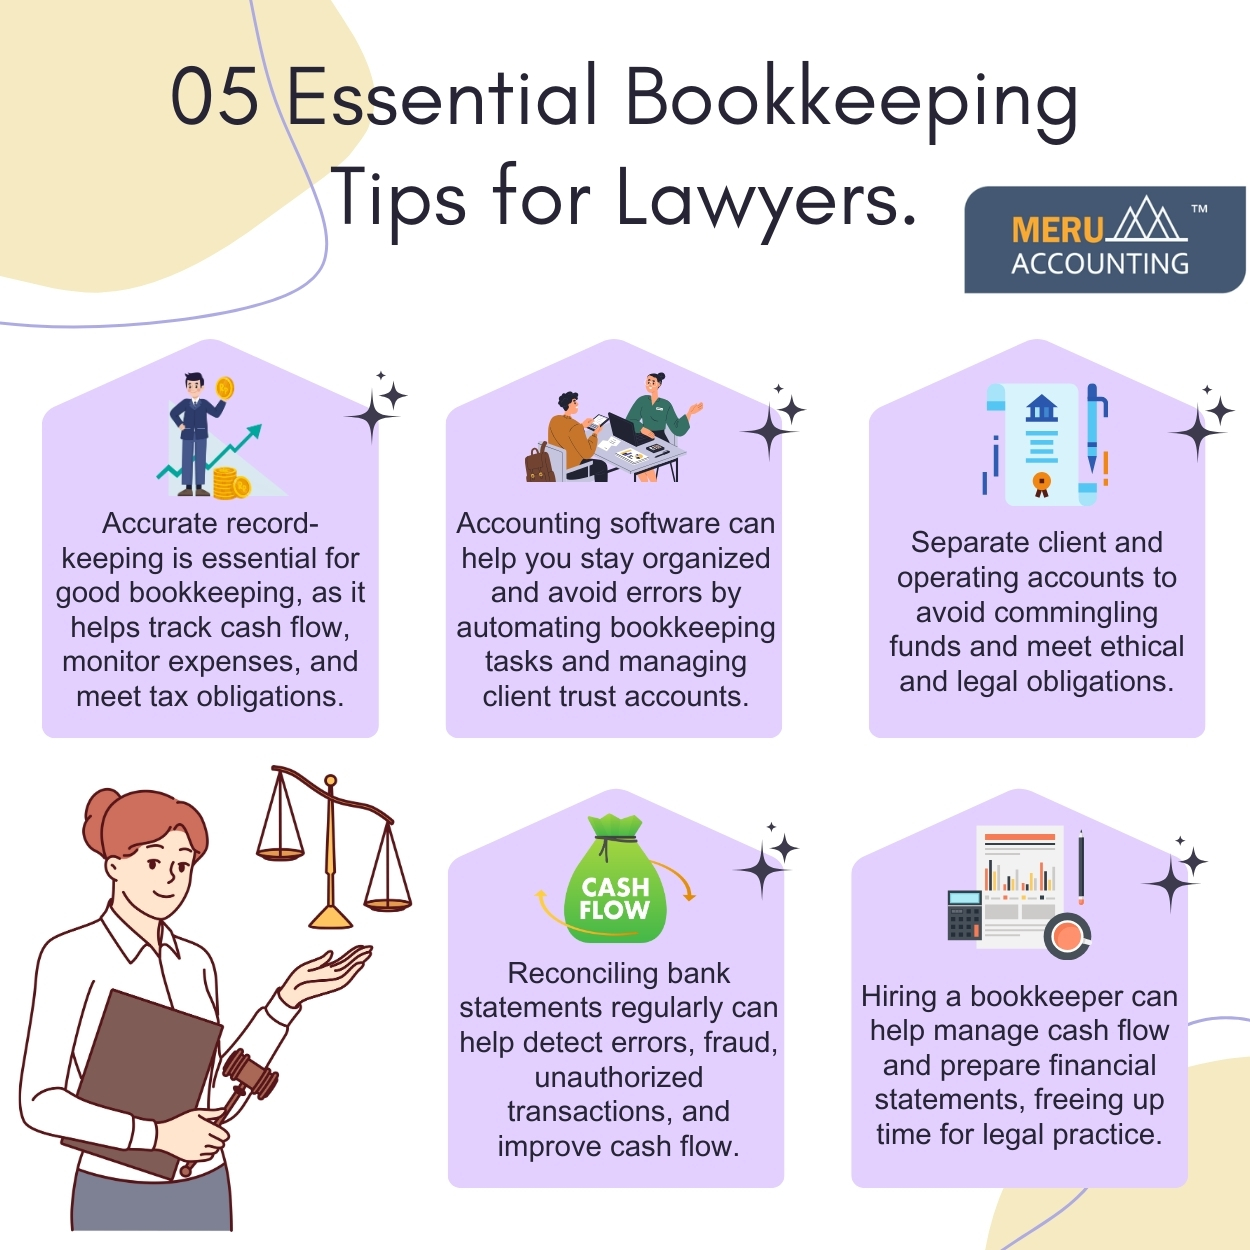 05 Essential Bookkeeping Tips for Lawyers. size 1250 by 1250 v1